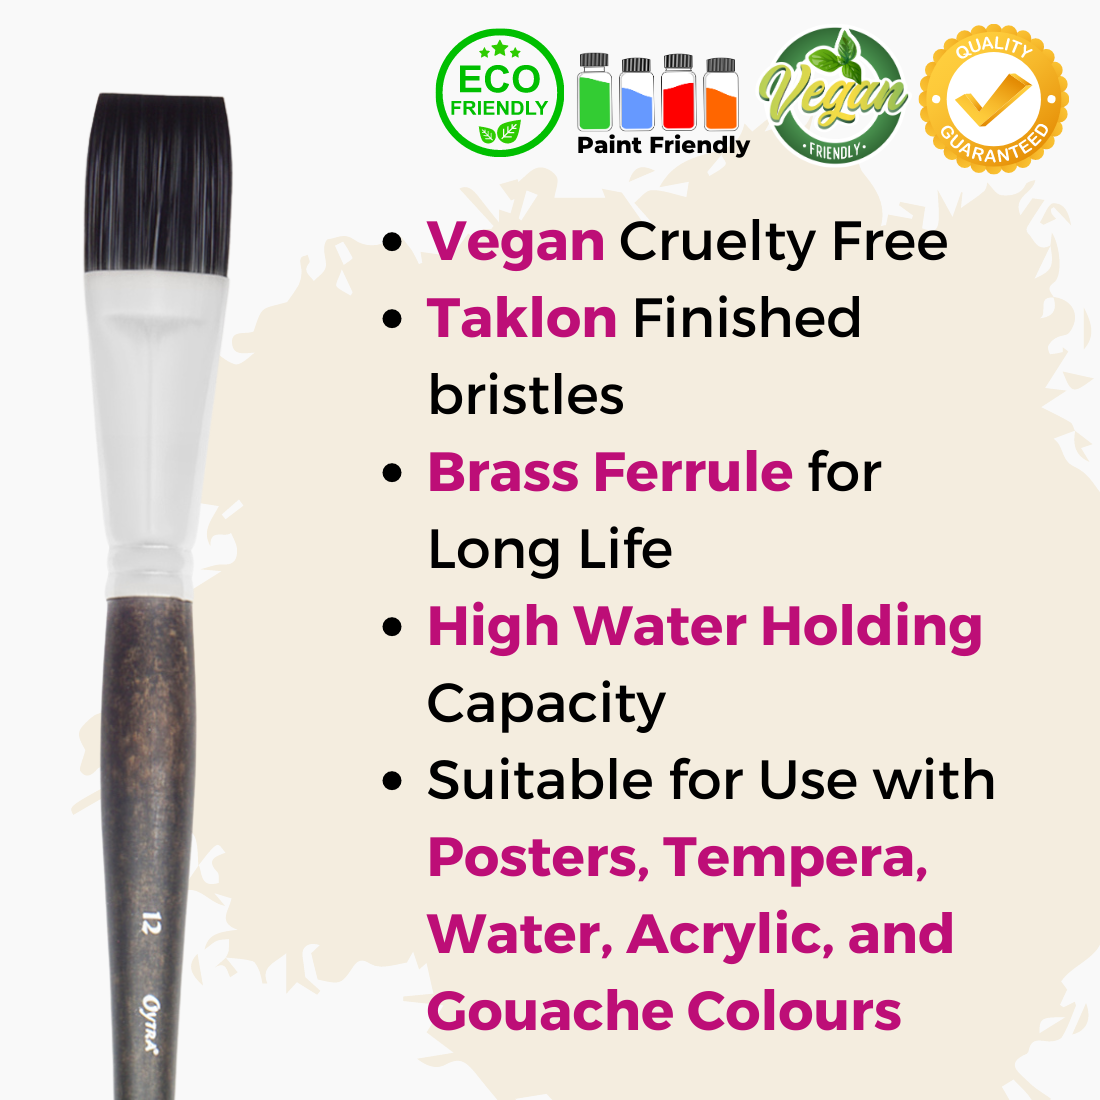 Artist Quality Synthetic Flat Tip Paintbrushes of 7pc for Watercolor &  Acrylic Painting at Rs 160/piece, Mumbai